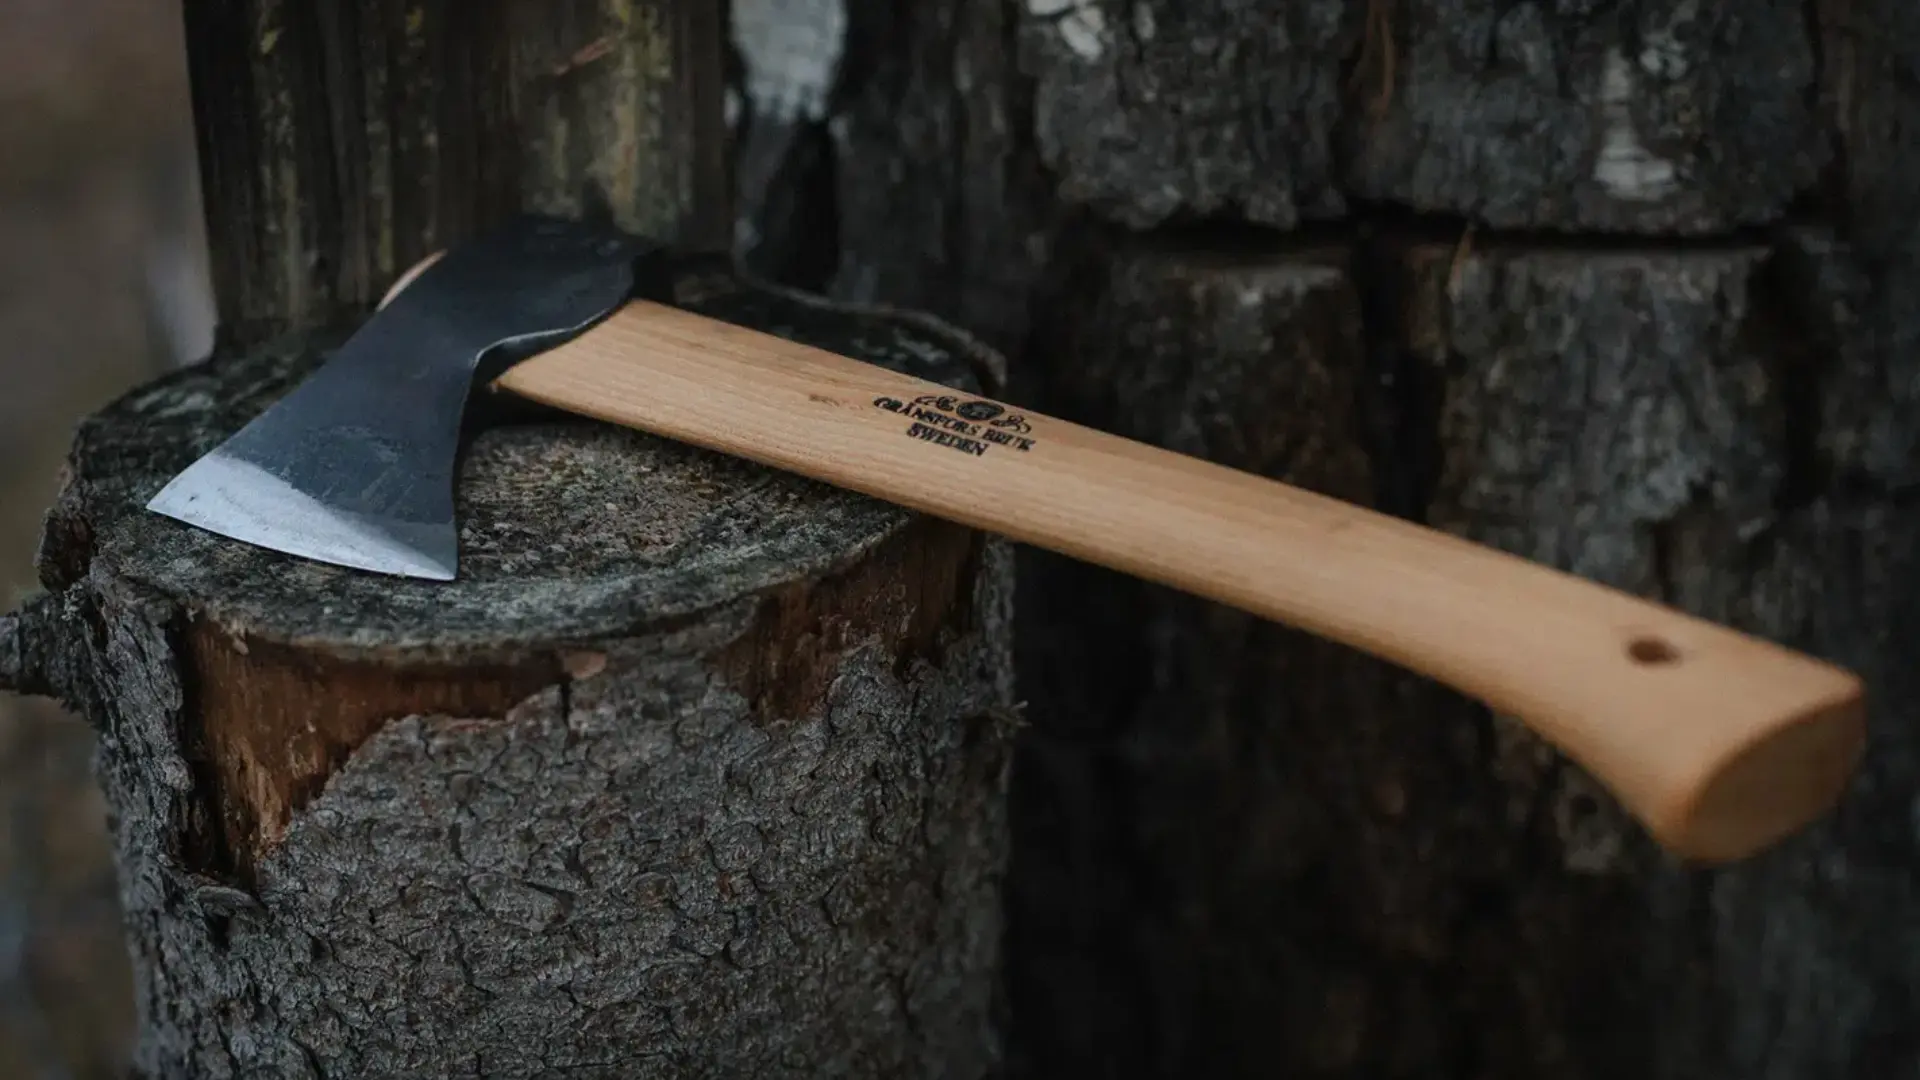 How the Axe Became the Saw